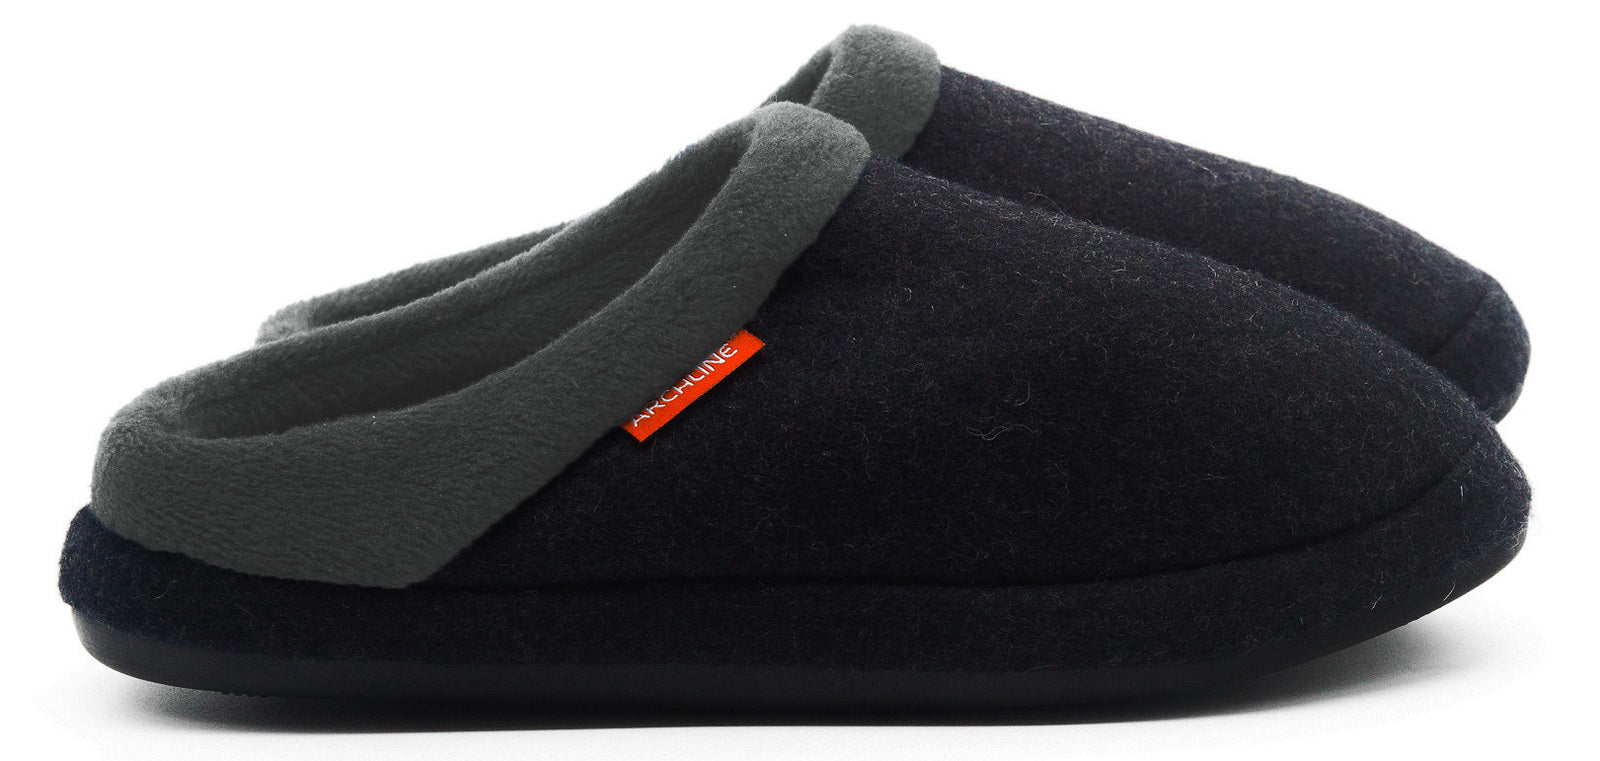 Orthotic Slippers Slip On Arch Scuffs Orthopedic Moccasins - Charcoal Marle - EUR 39